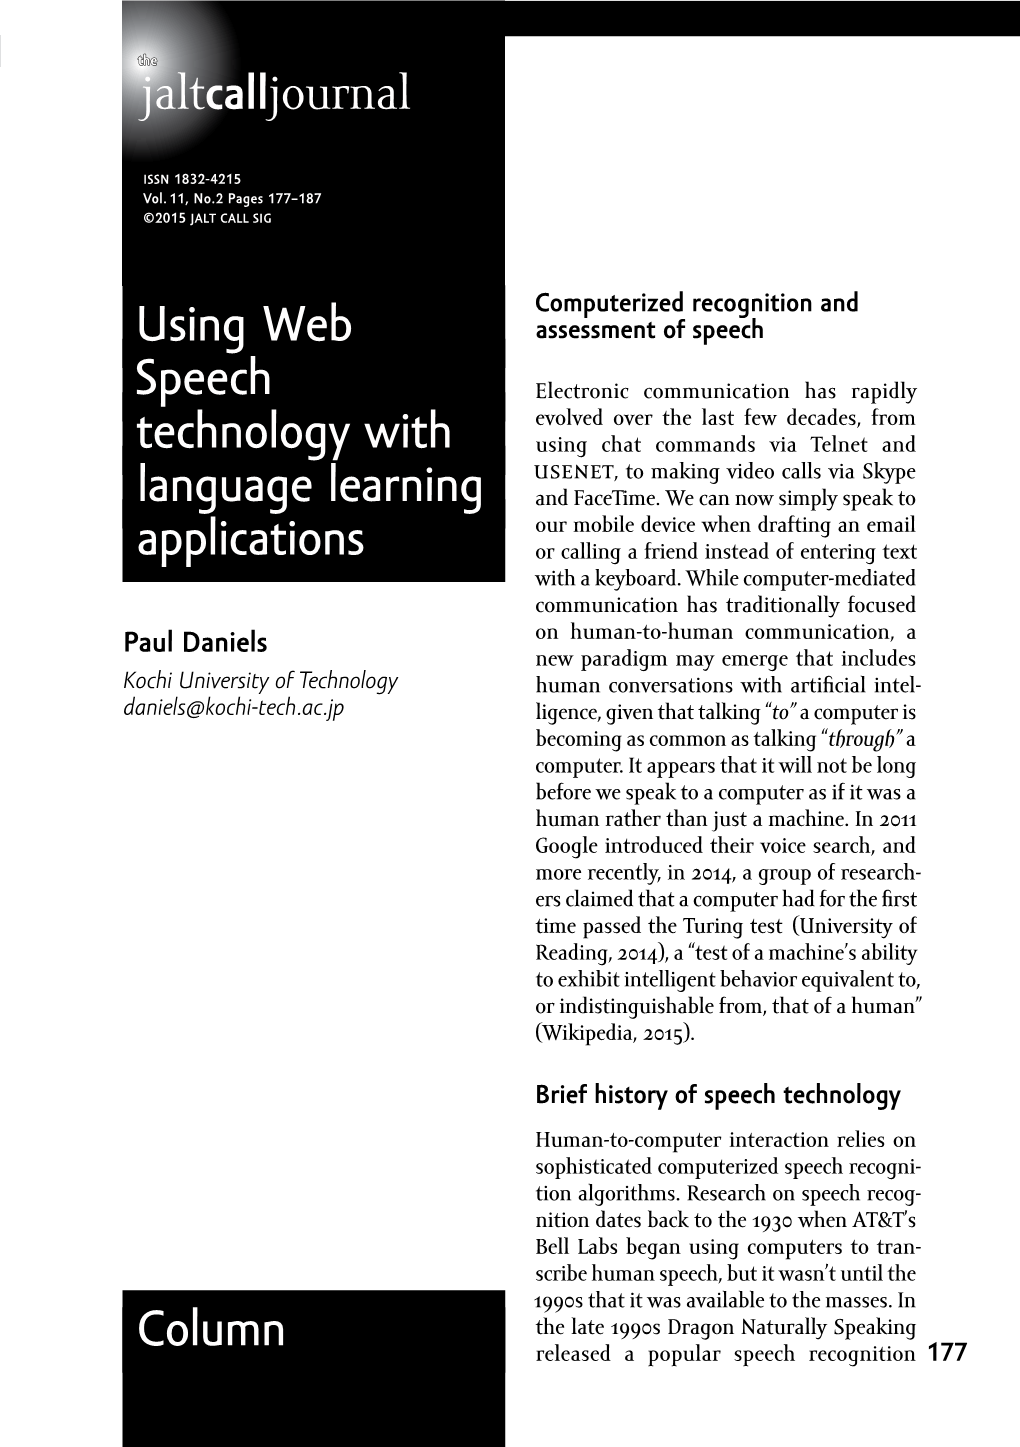 Using Web Speech Technology with Language Learning Applications